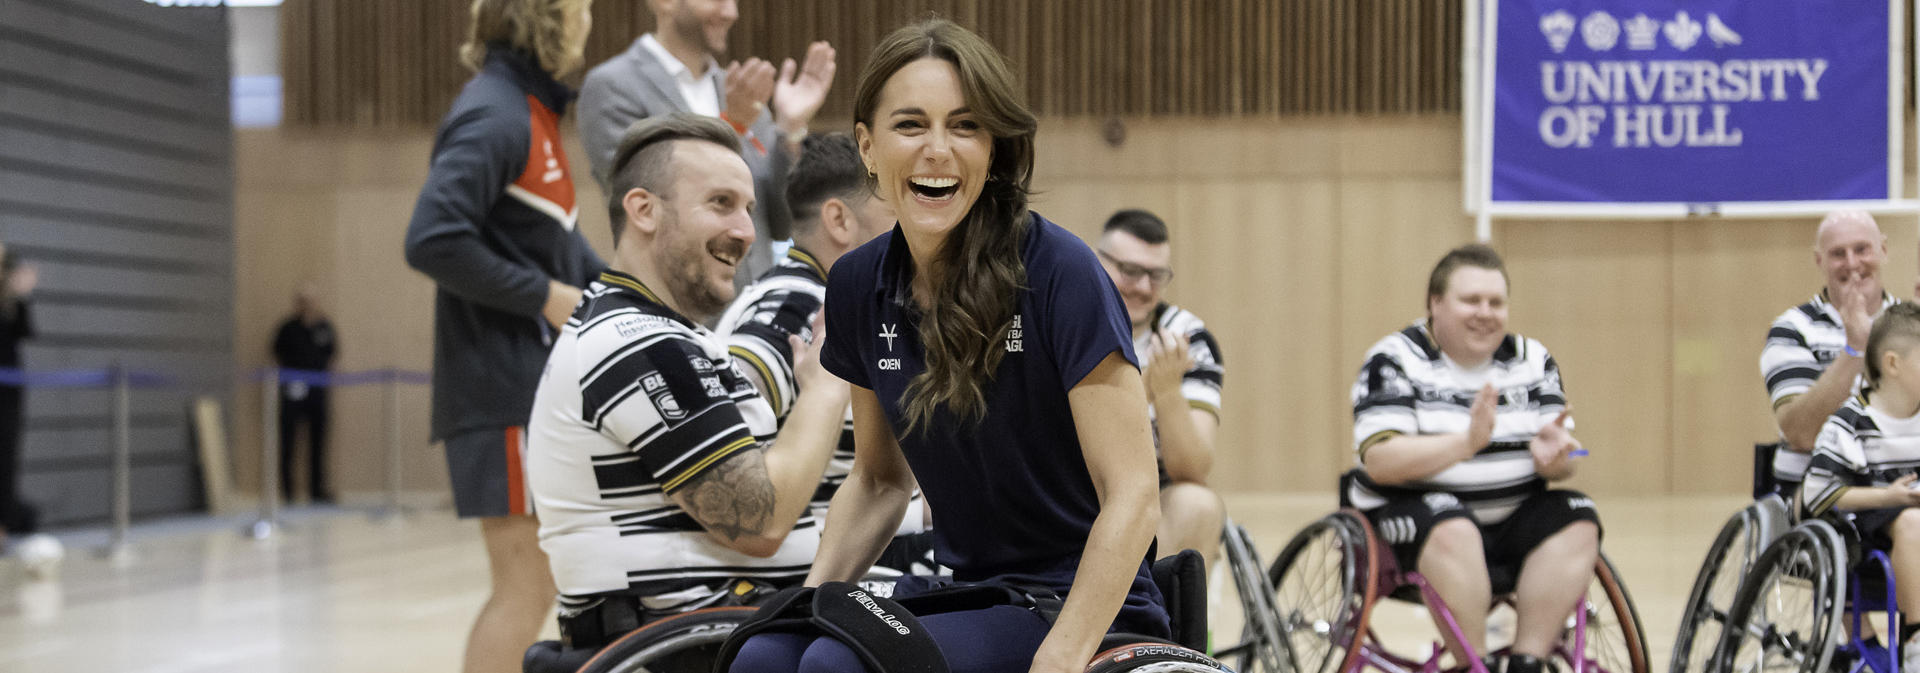 HRH Princess of Wales taking part in wheelchair rugby